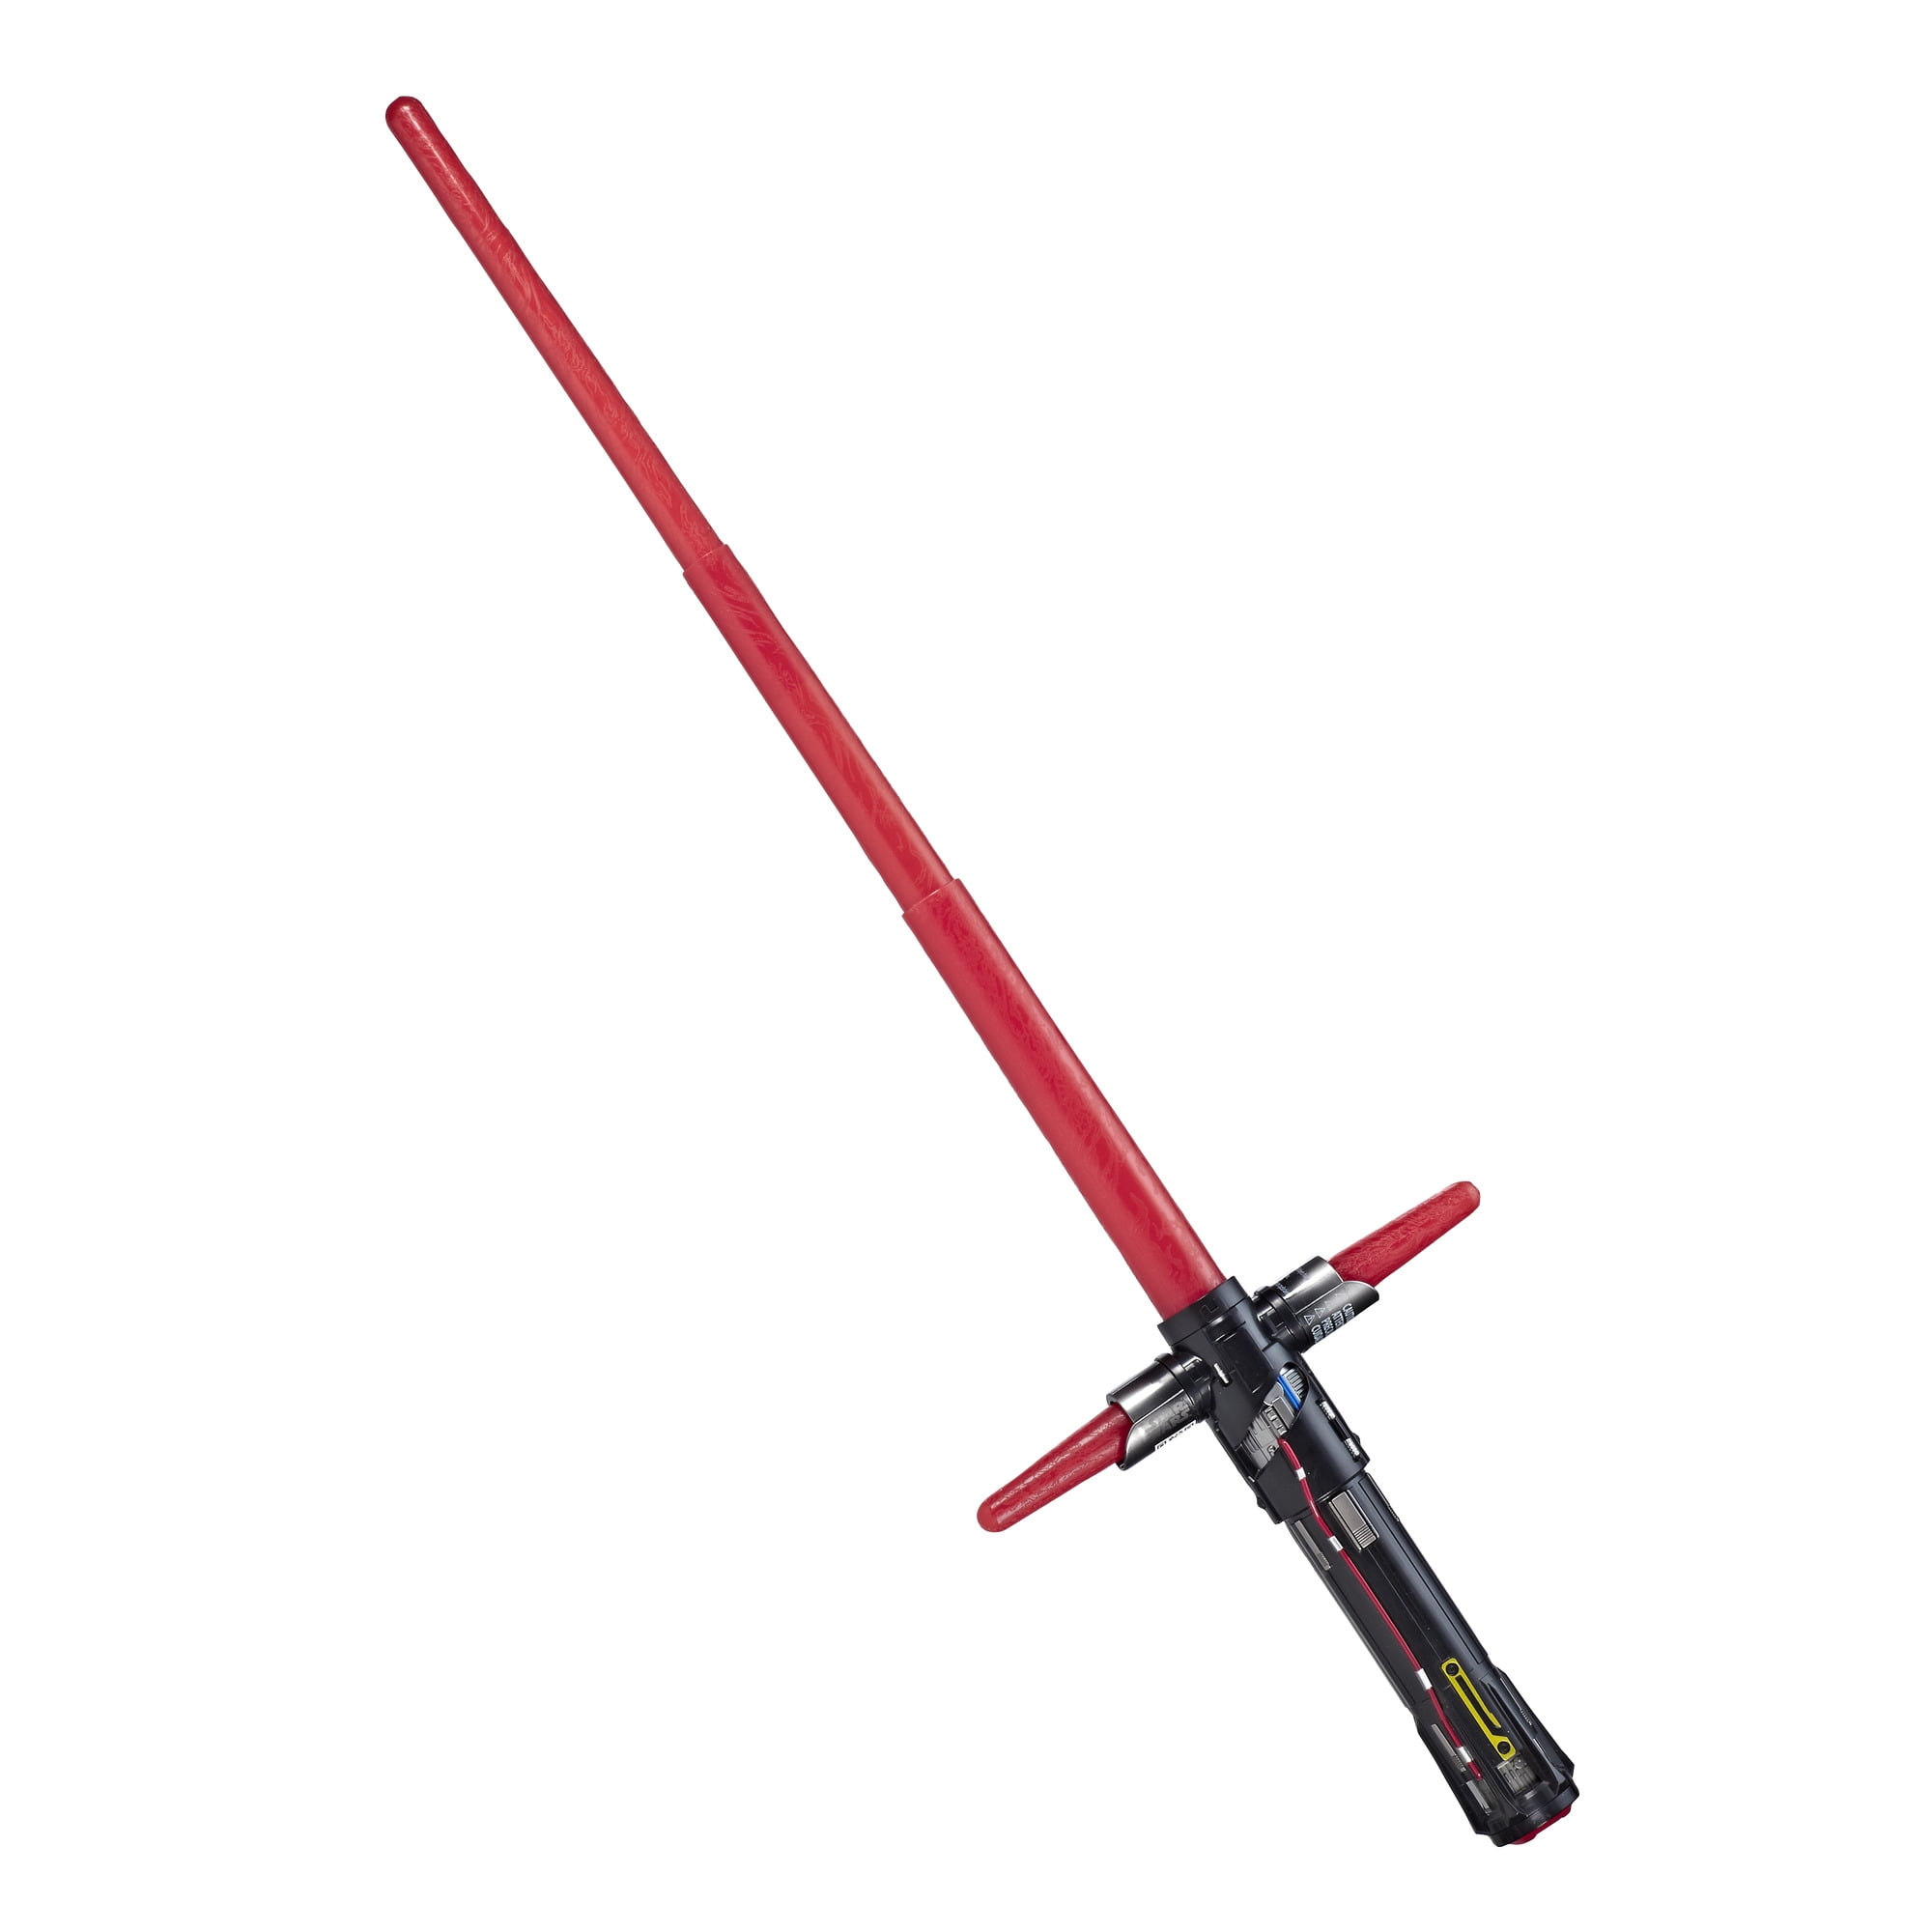 2020 Star Wars Saber Toy features the 7 color Light Sword For Kids Gift 